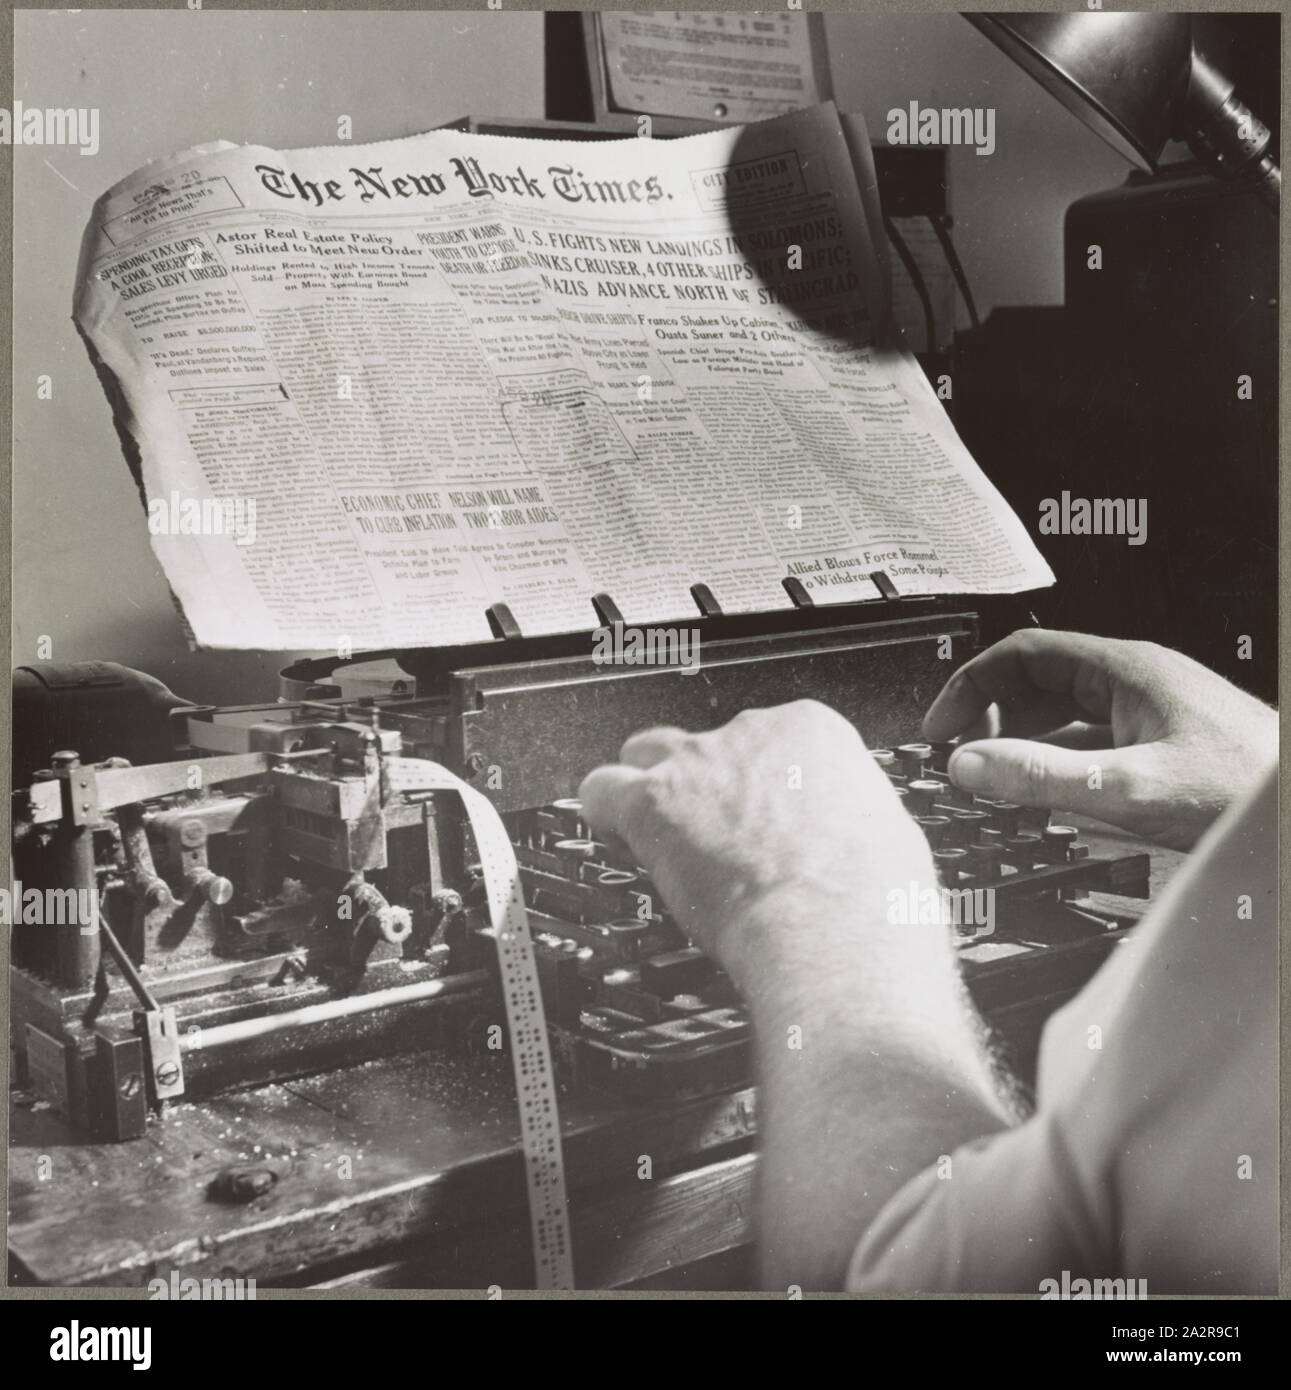 Radio room of the New York Times newspaper; Radio room of the New York Times newspaper Times news passed by naval censor (see stamps on paper) is sent out twice daily by the Times' own short wave radio transmitter in international Morse code, and received by ships.; Stock Photo